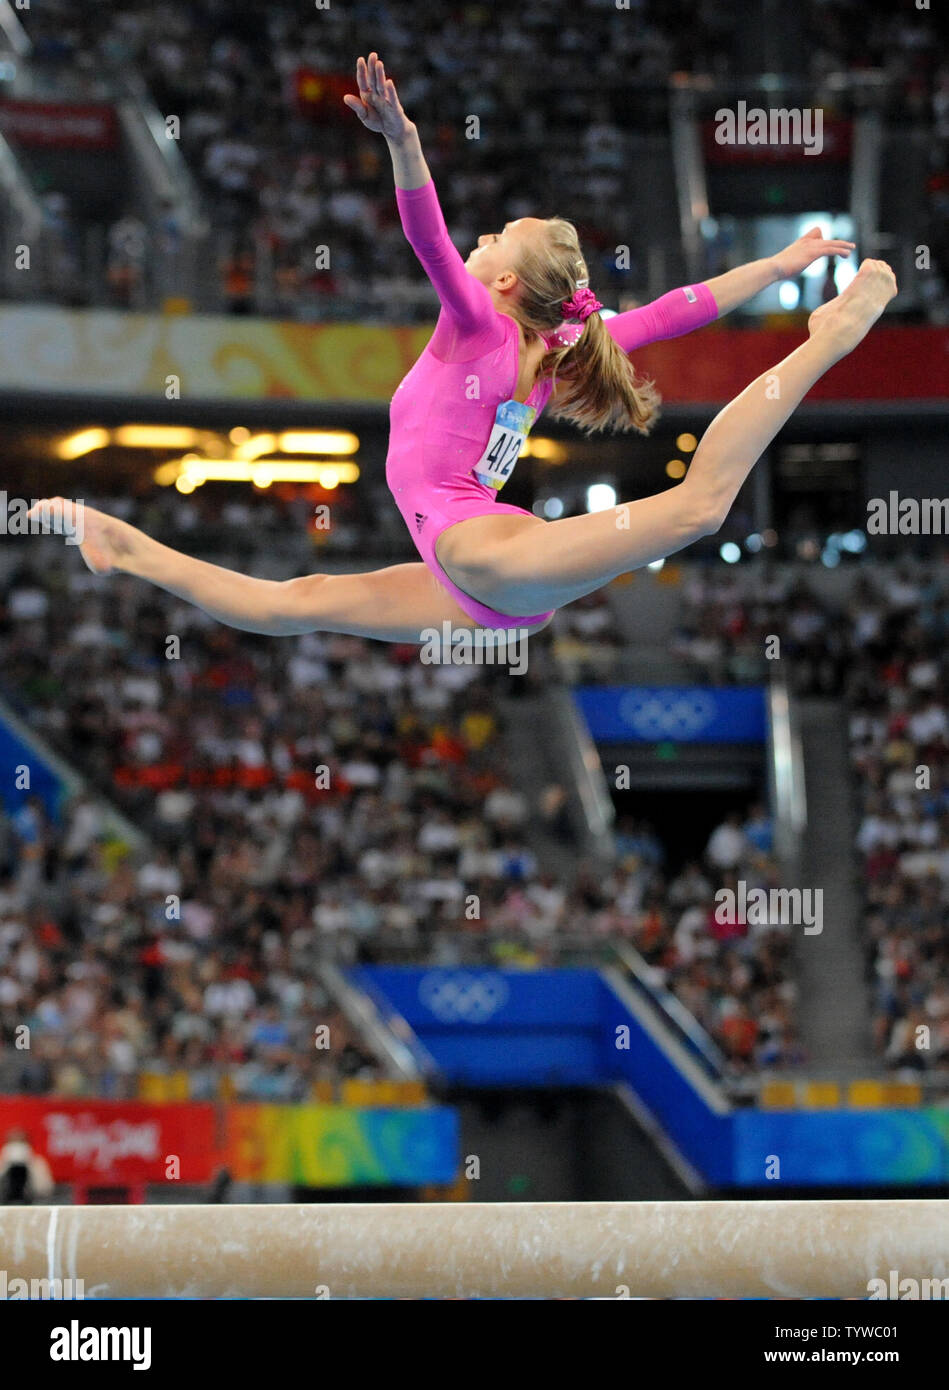 USA's Nastia Liukin soars high above the Balance Beam during her performance in the Women's Individual All-Around Gymnastics Final at the National Indoor Stadium at the Summer Olympics in Beijing on August 15, 2008.  Liukin got the gold medal as she finished first ahead of her teammate Shawn Johnson.  Liukin was born in 1989 in Moscow in the former Soviet Union, now Russia.    (UPI Photo/Pat Benic) Stock Photo